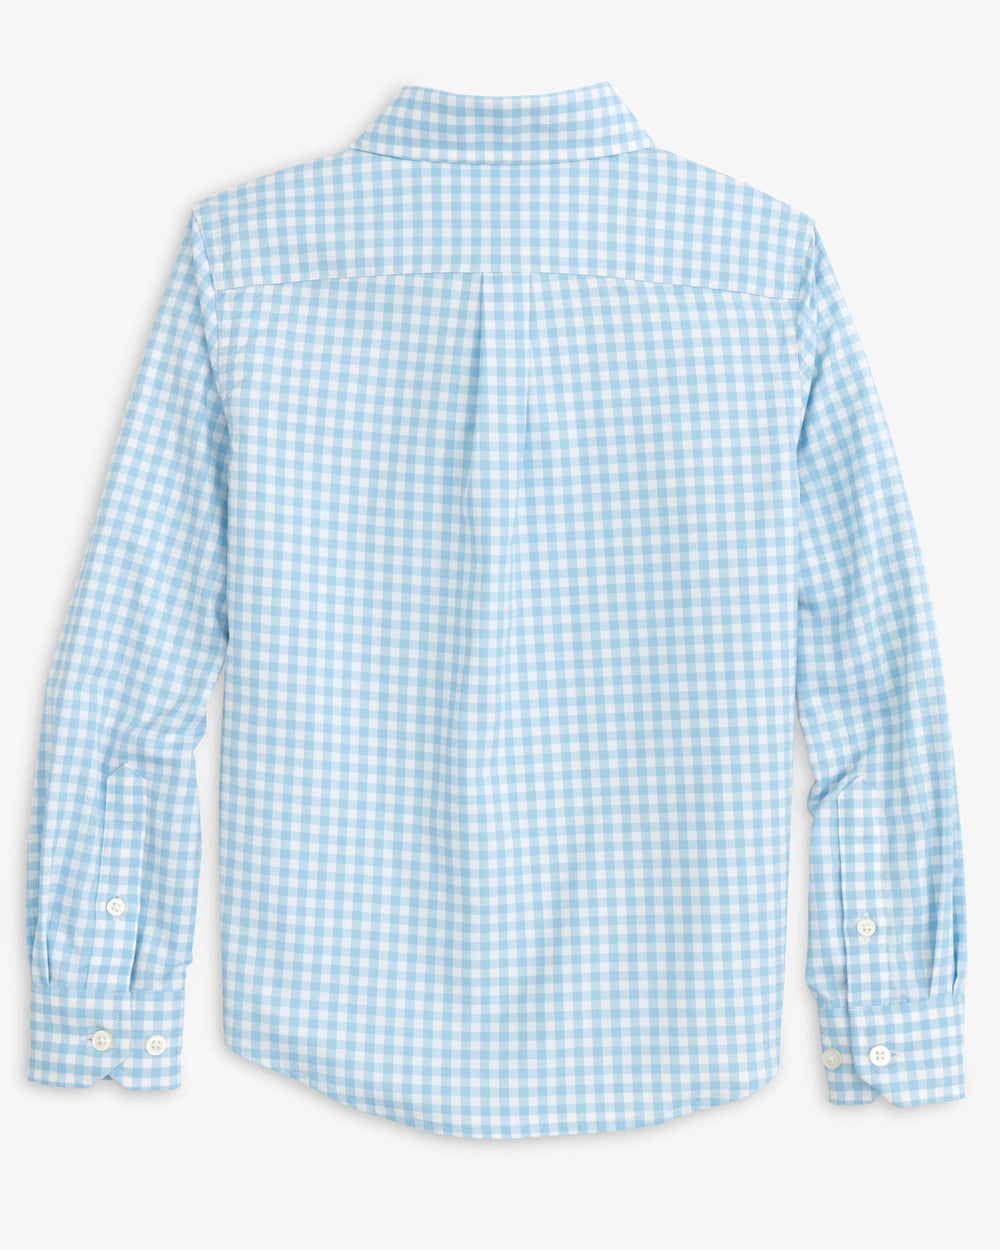 The back view of the Southern Tide Youth Long Sleeve Hartwell Plaid Sportshirt by Southern Tide - Rain Water